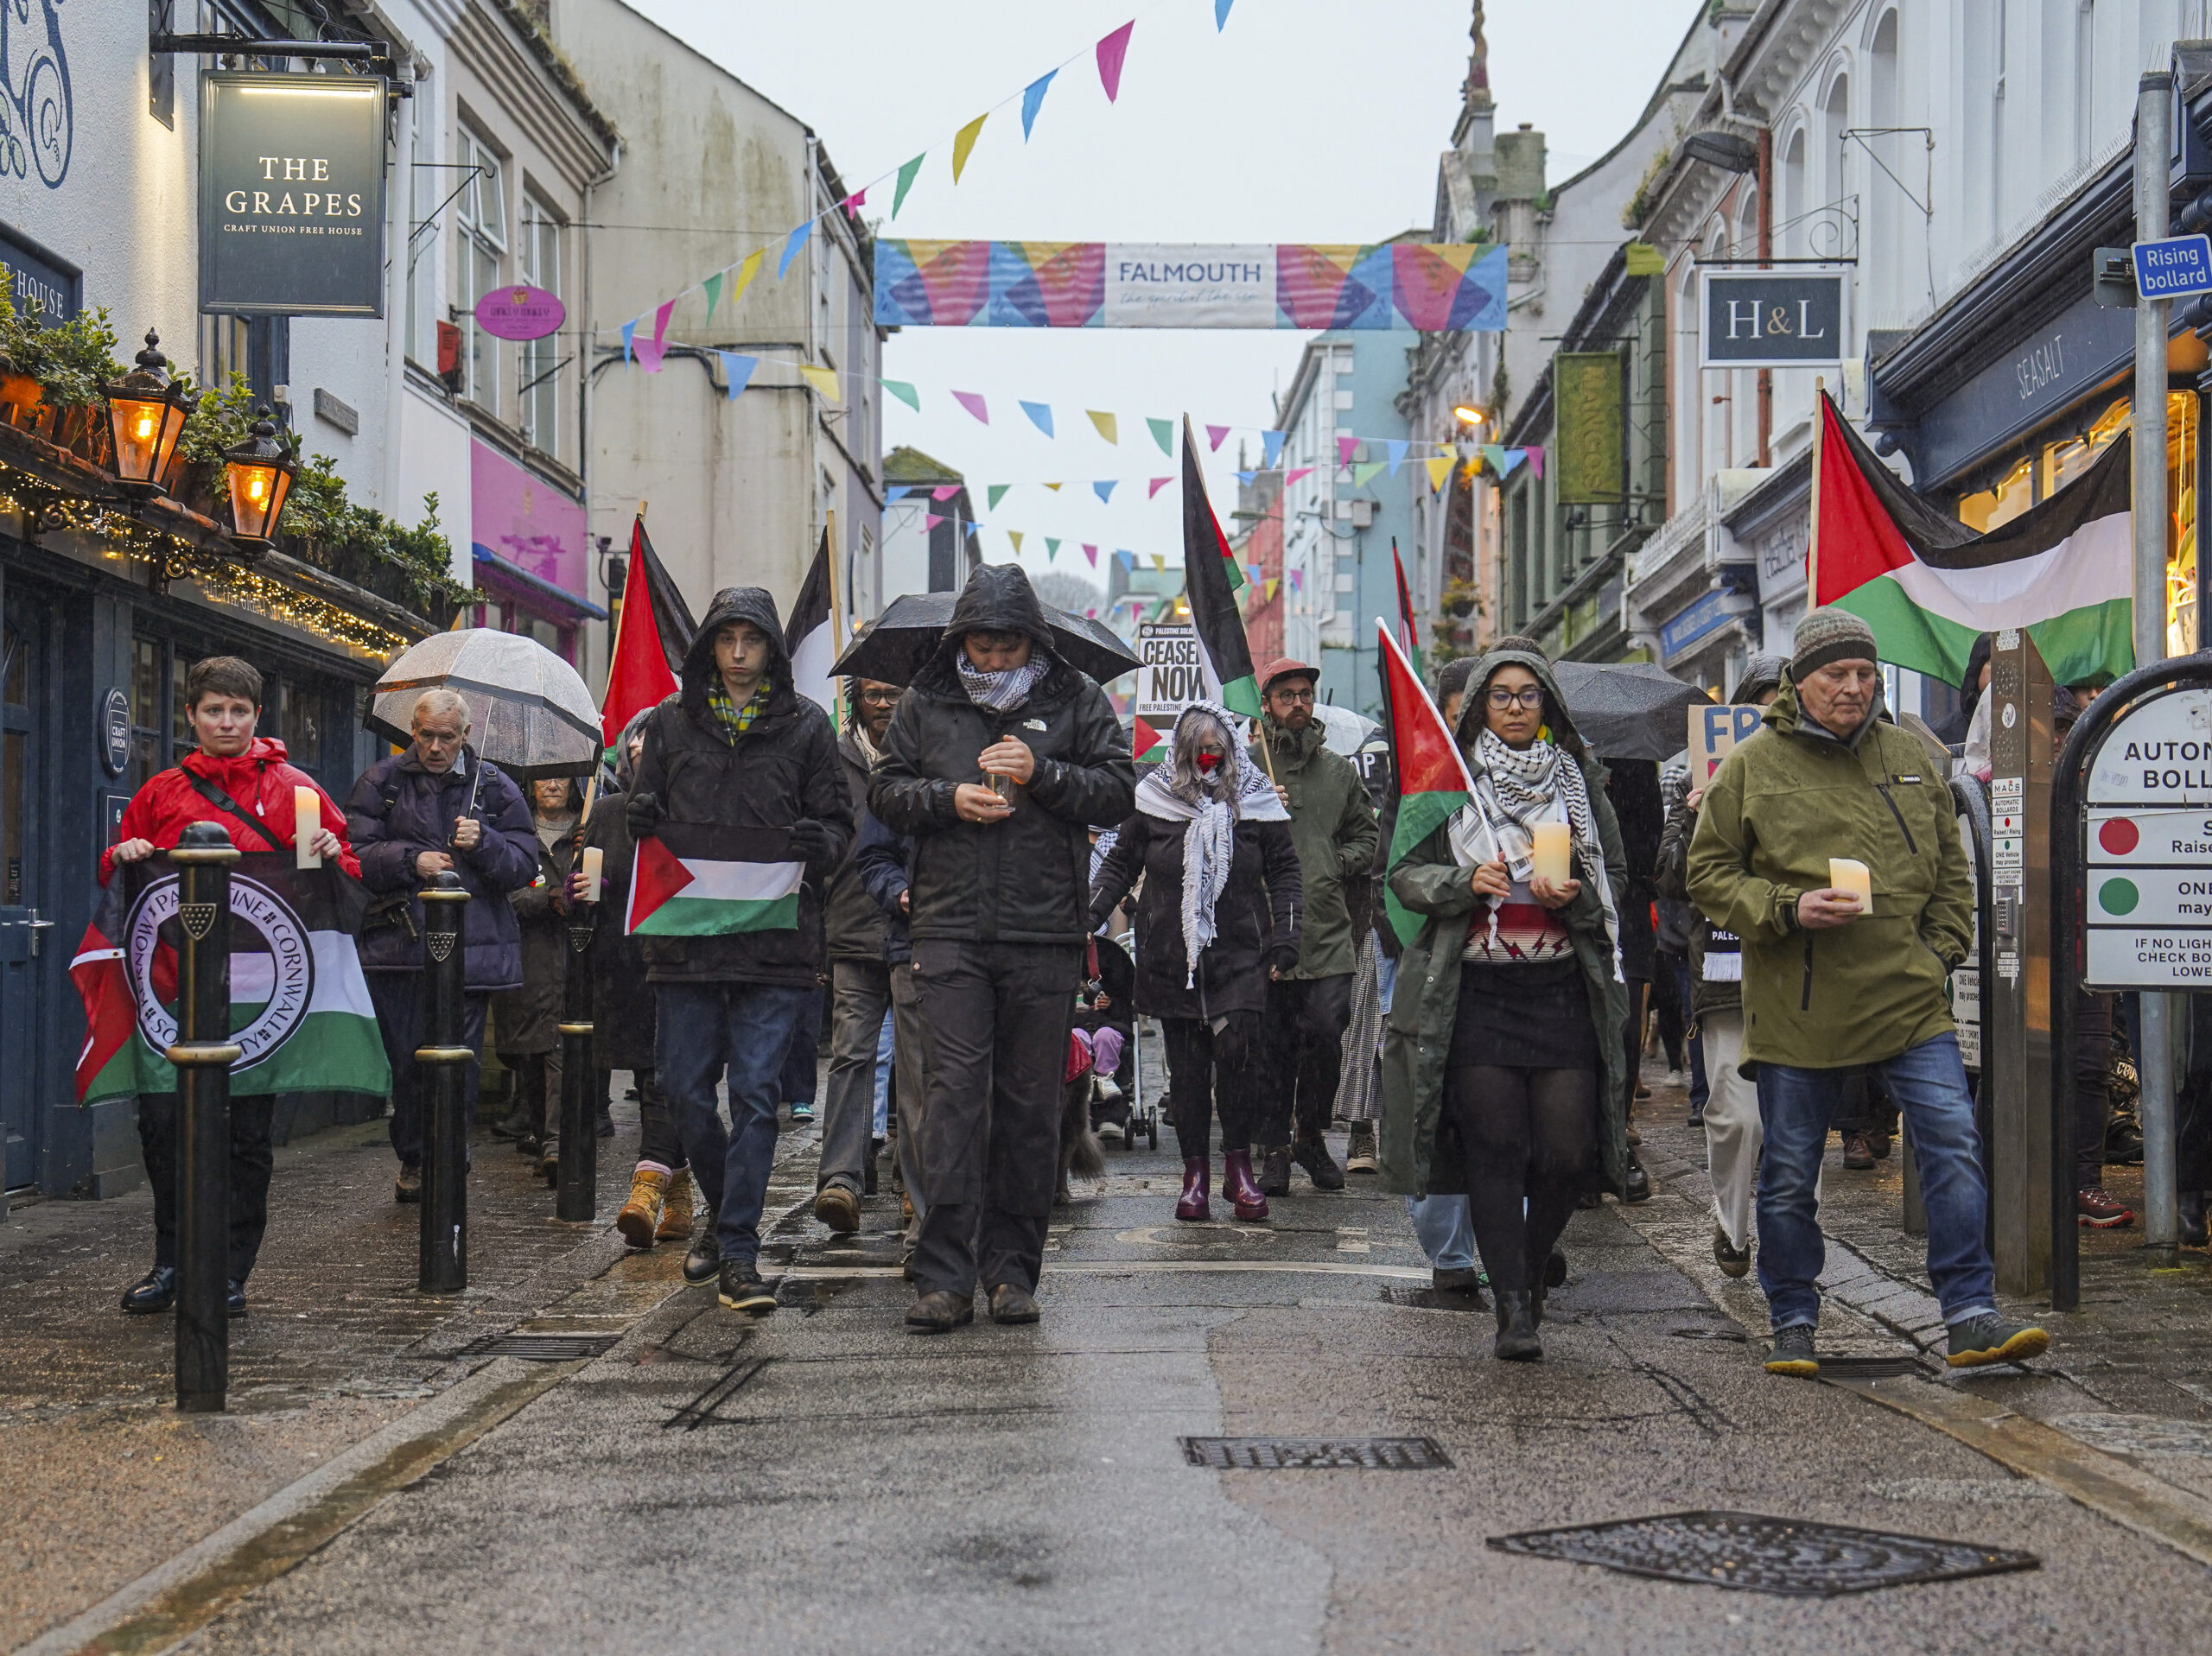 Members of the public join a walking vigil through the streets of Falmouth, England, for British aid worker James Henderson, organized by Palestine Solidarity Cornwall, April 3. Three British men working for World Central Kitchen were killed along with four colleagues when their clearly marked vehicles were targeted by Israeli military strikes.